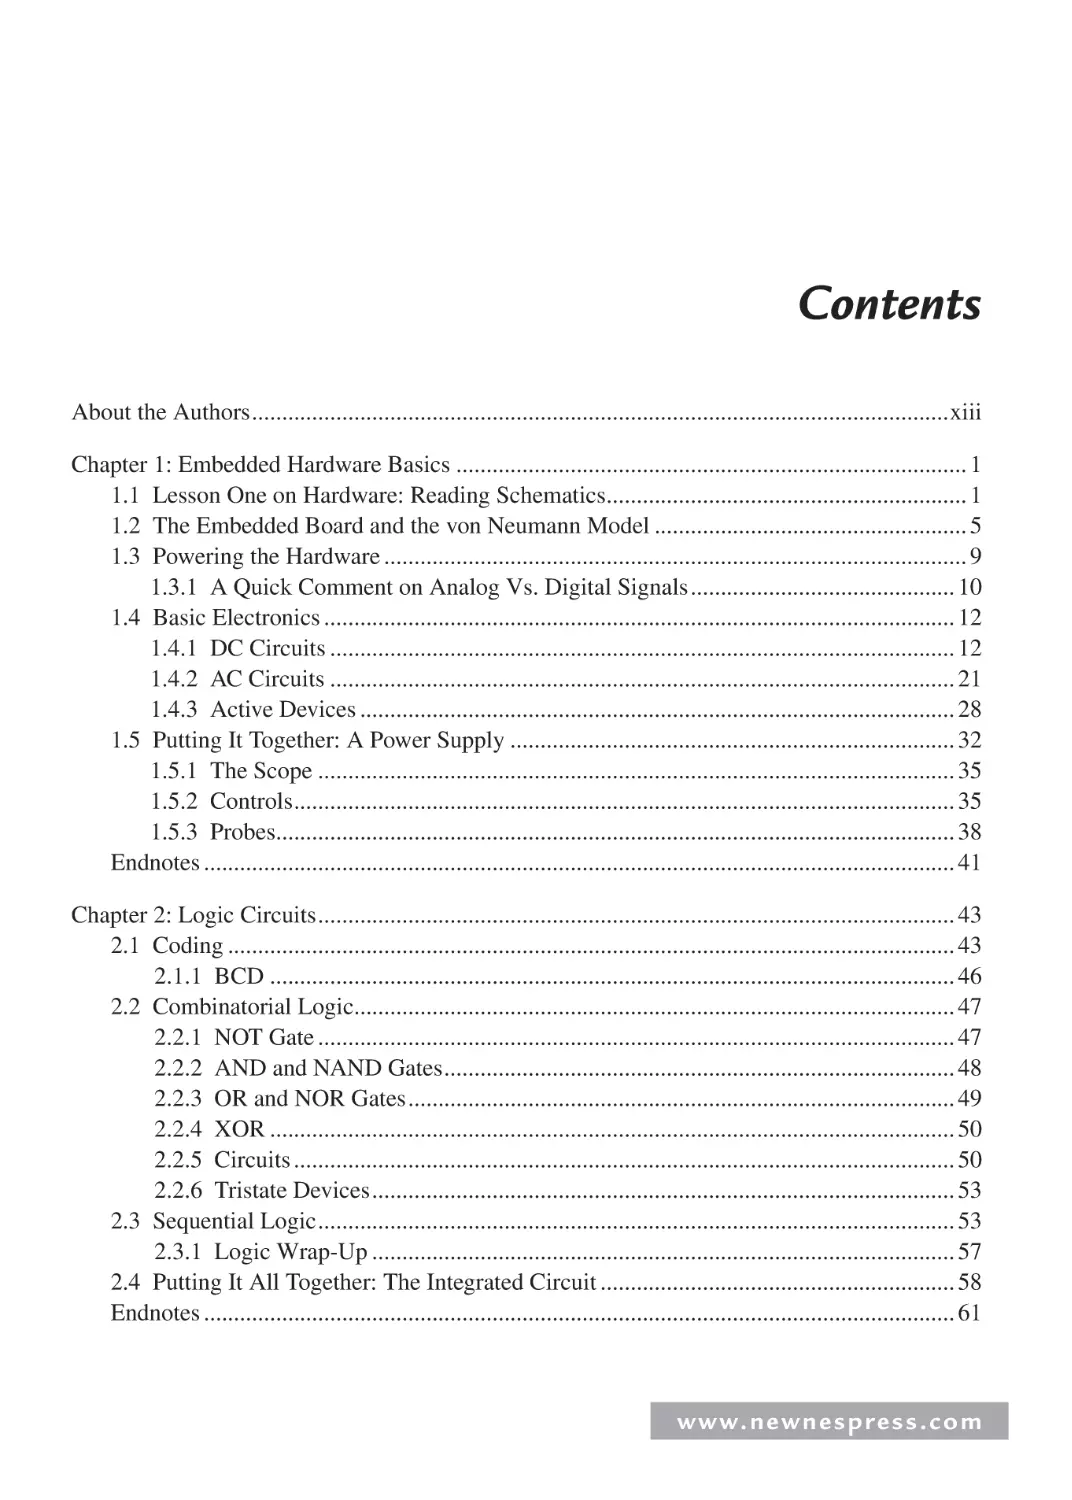 Contents (with page links)